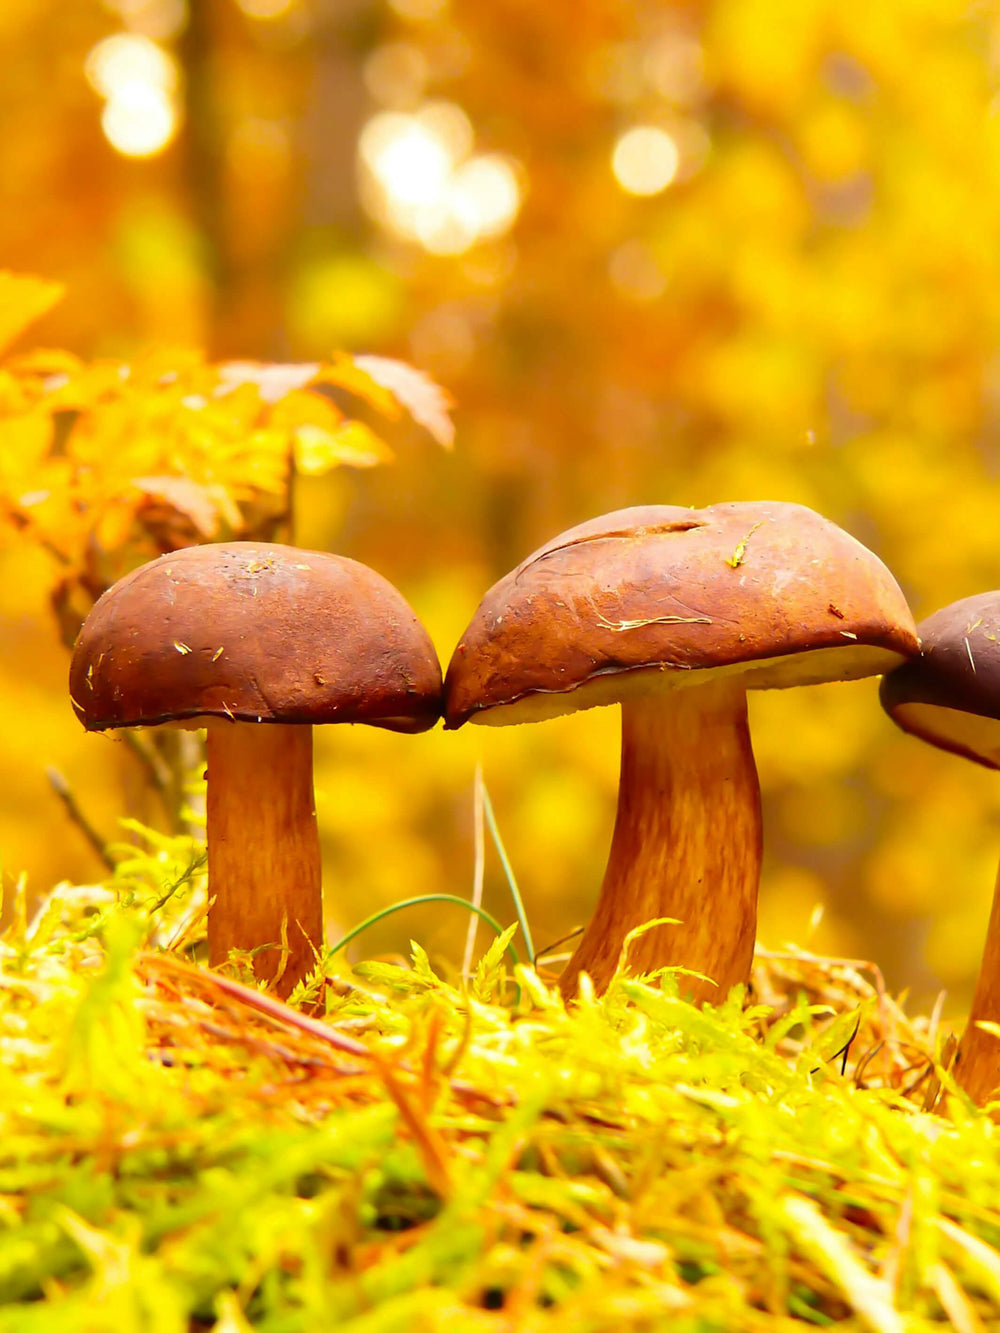 This is a picture of brown mushrooms and a yellow forest that inspired the Mushroom Earrings.